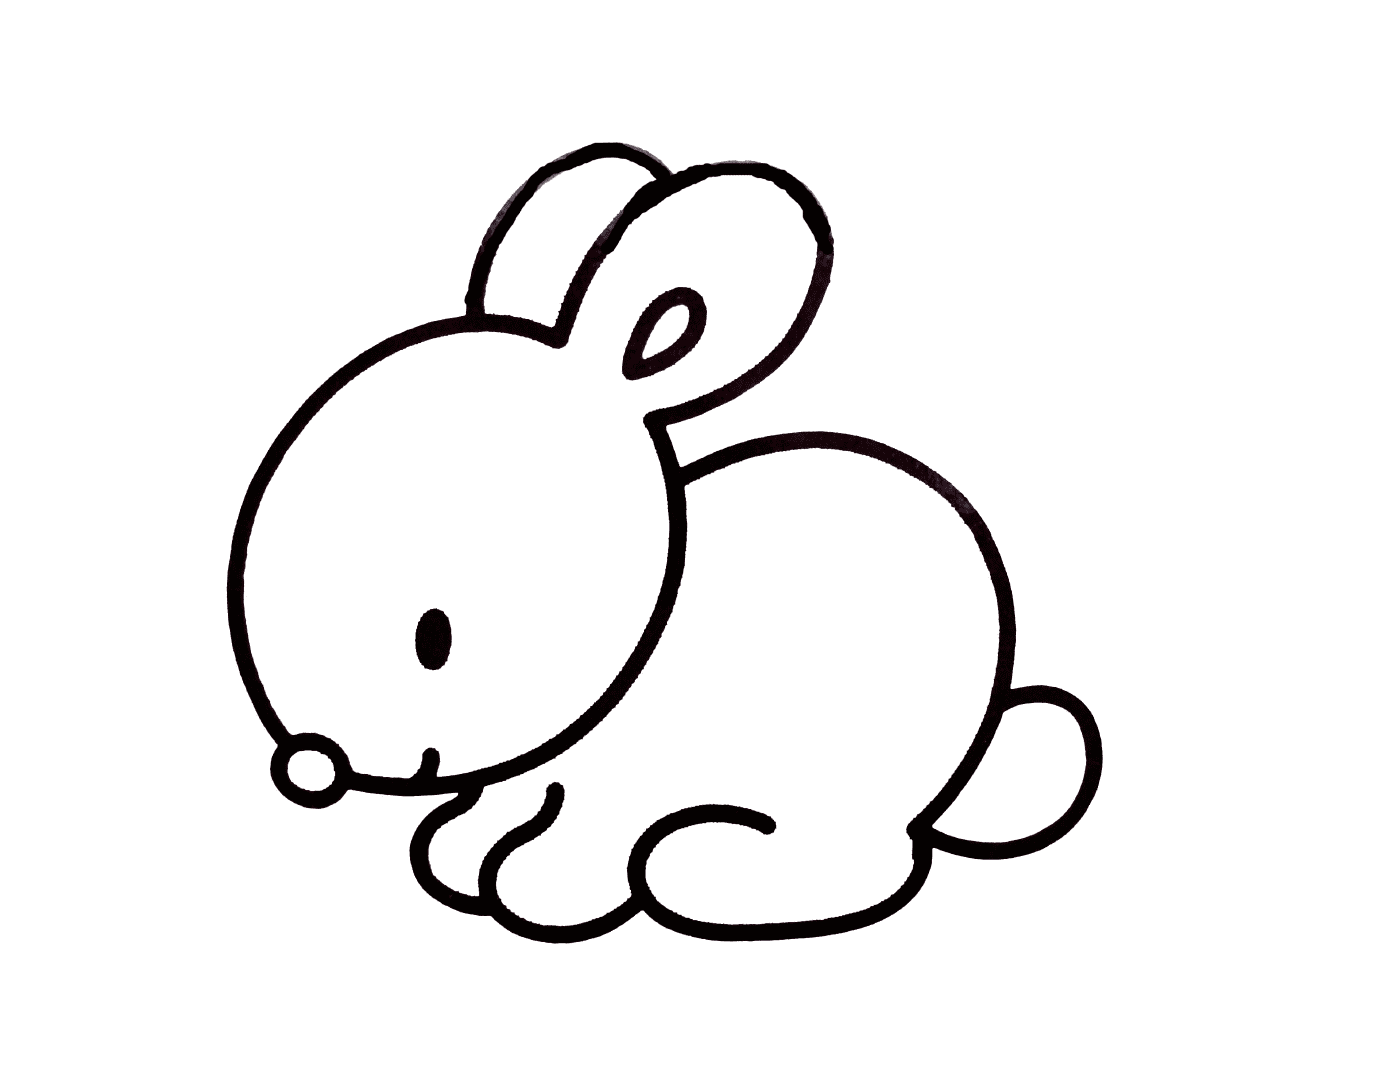  An easy to draw rabbit 